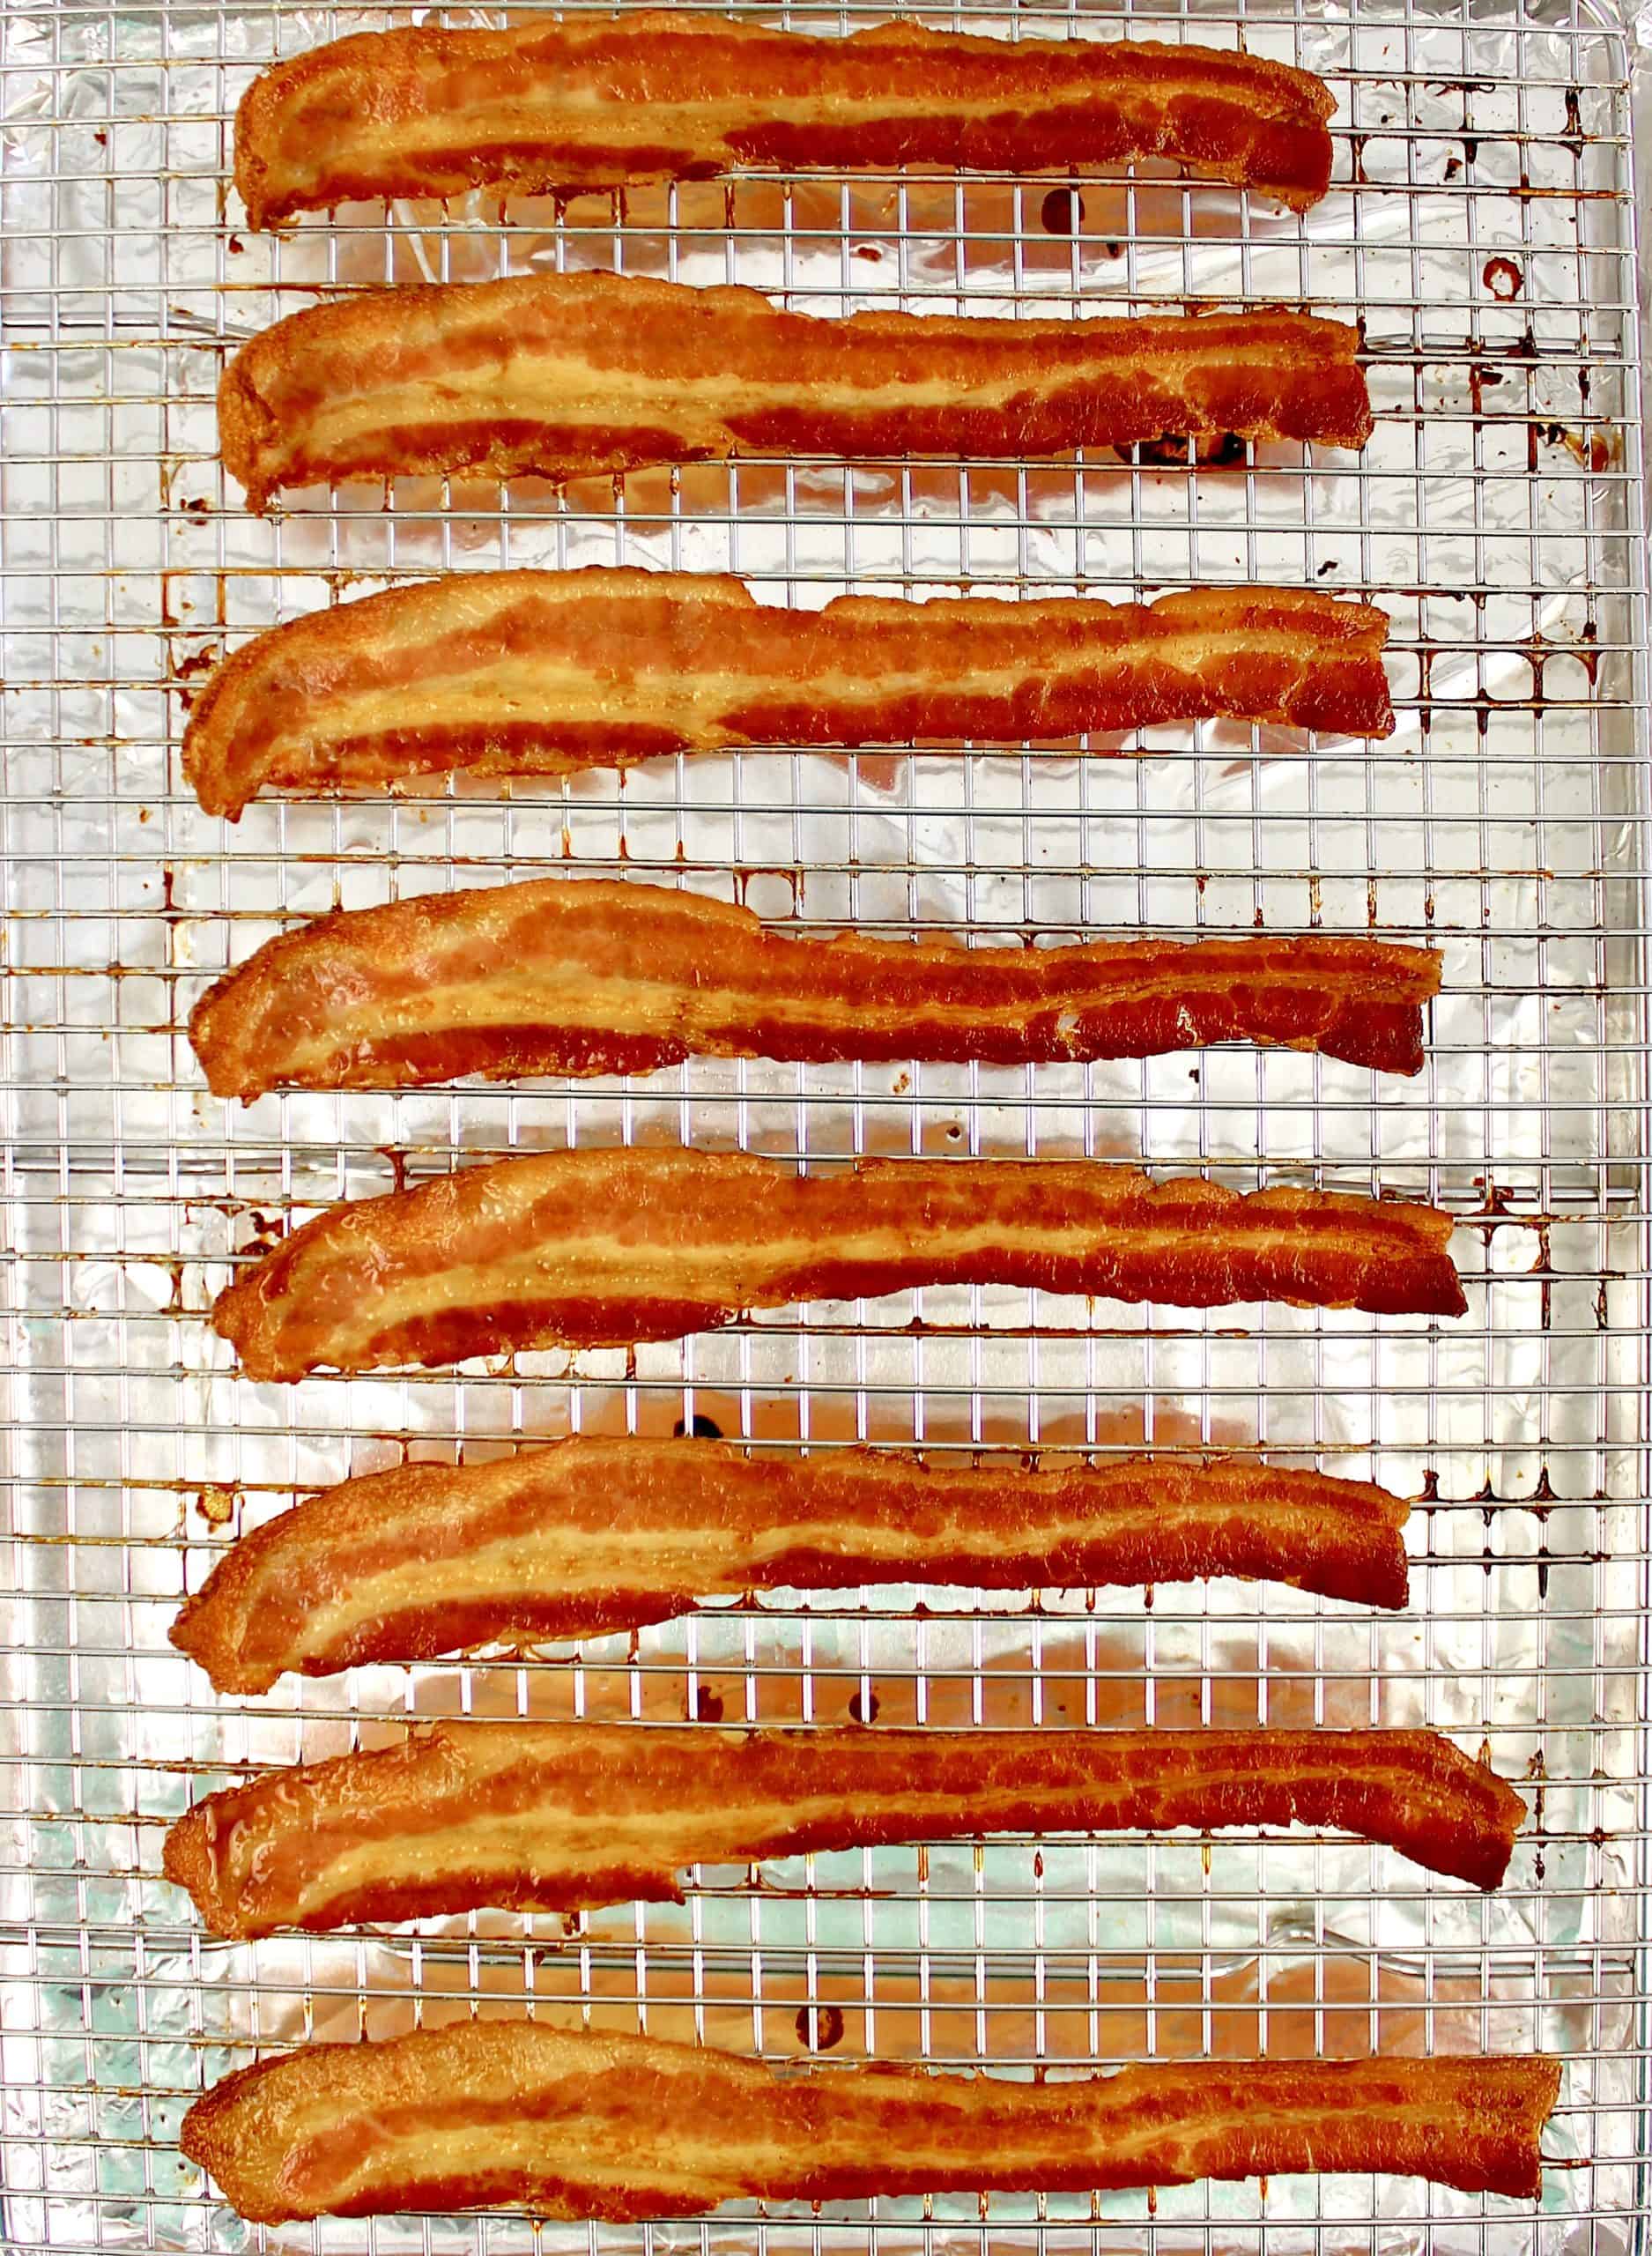 slices of cooked bacon on wire rack